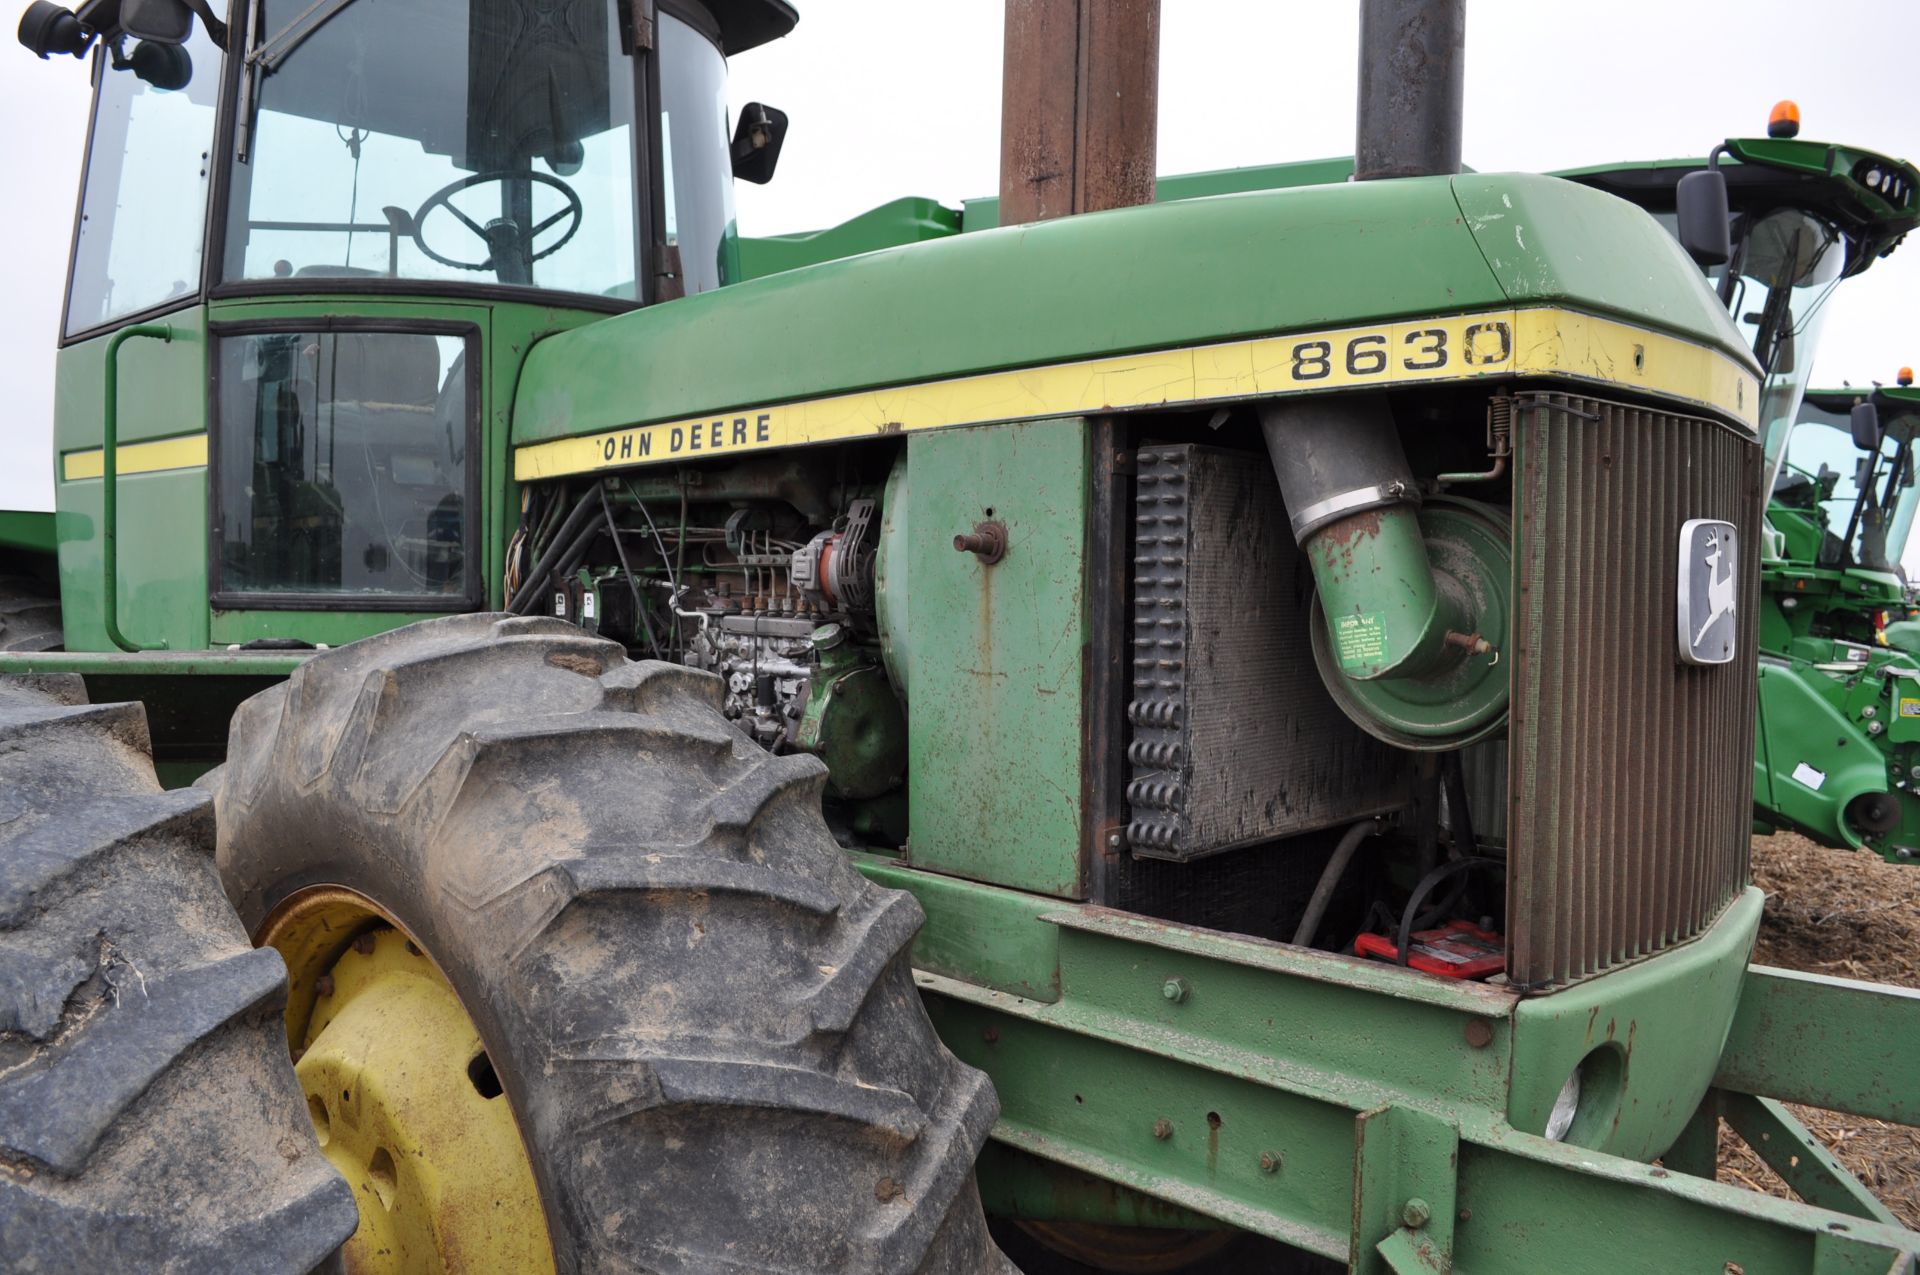 John Deere 8630 4WD tractor, 18.4-38 duals, 3 hyd remotes, 3 pt, quick hitch, 1000 PTO - Image 16 of 28